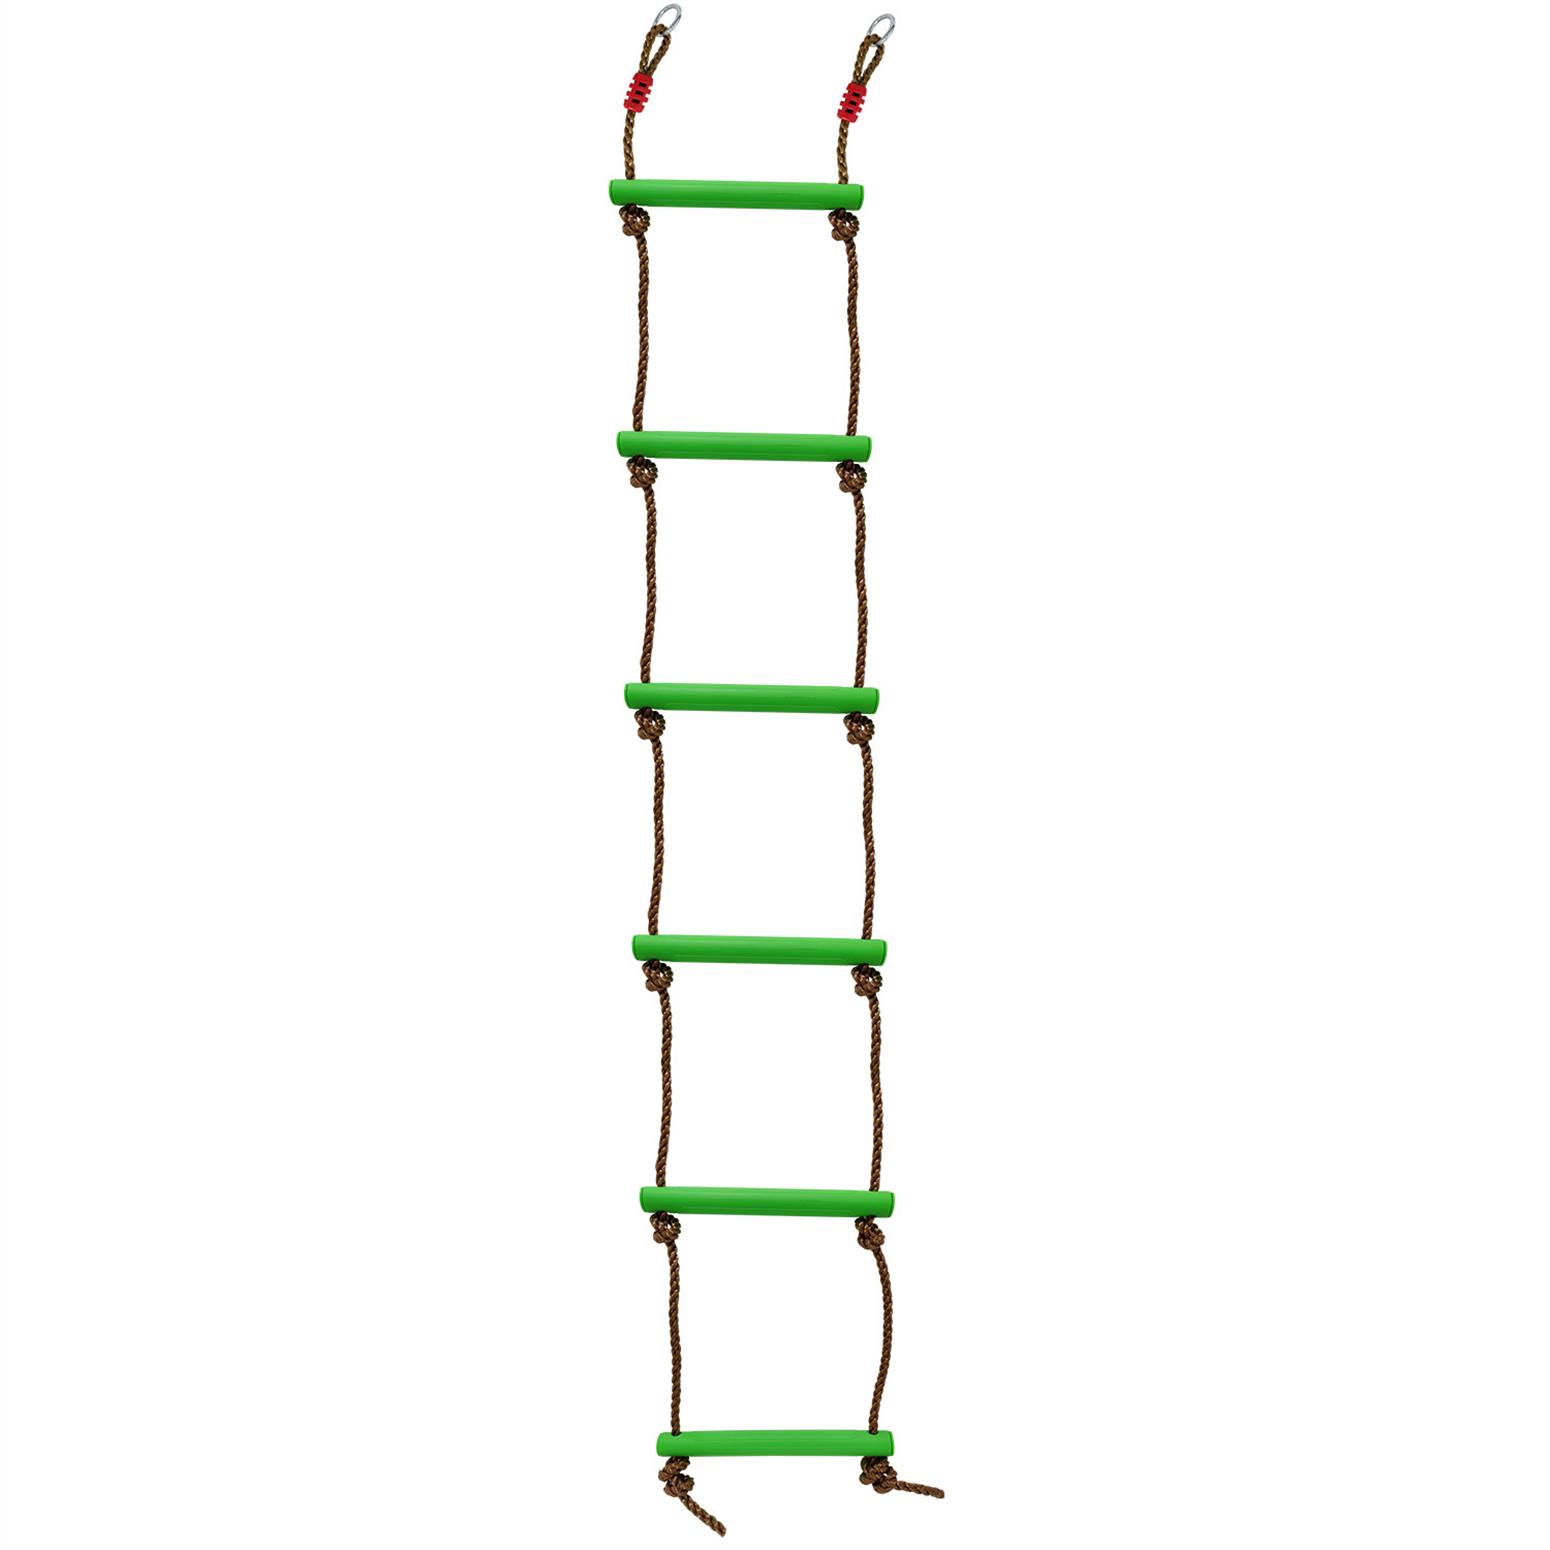 Climbing Rope Physical Sport